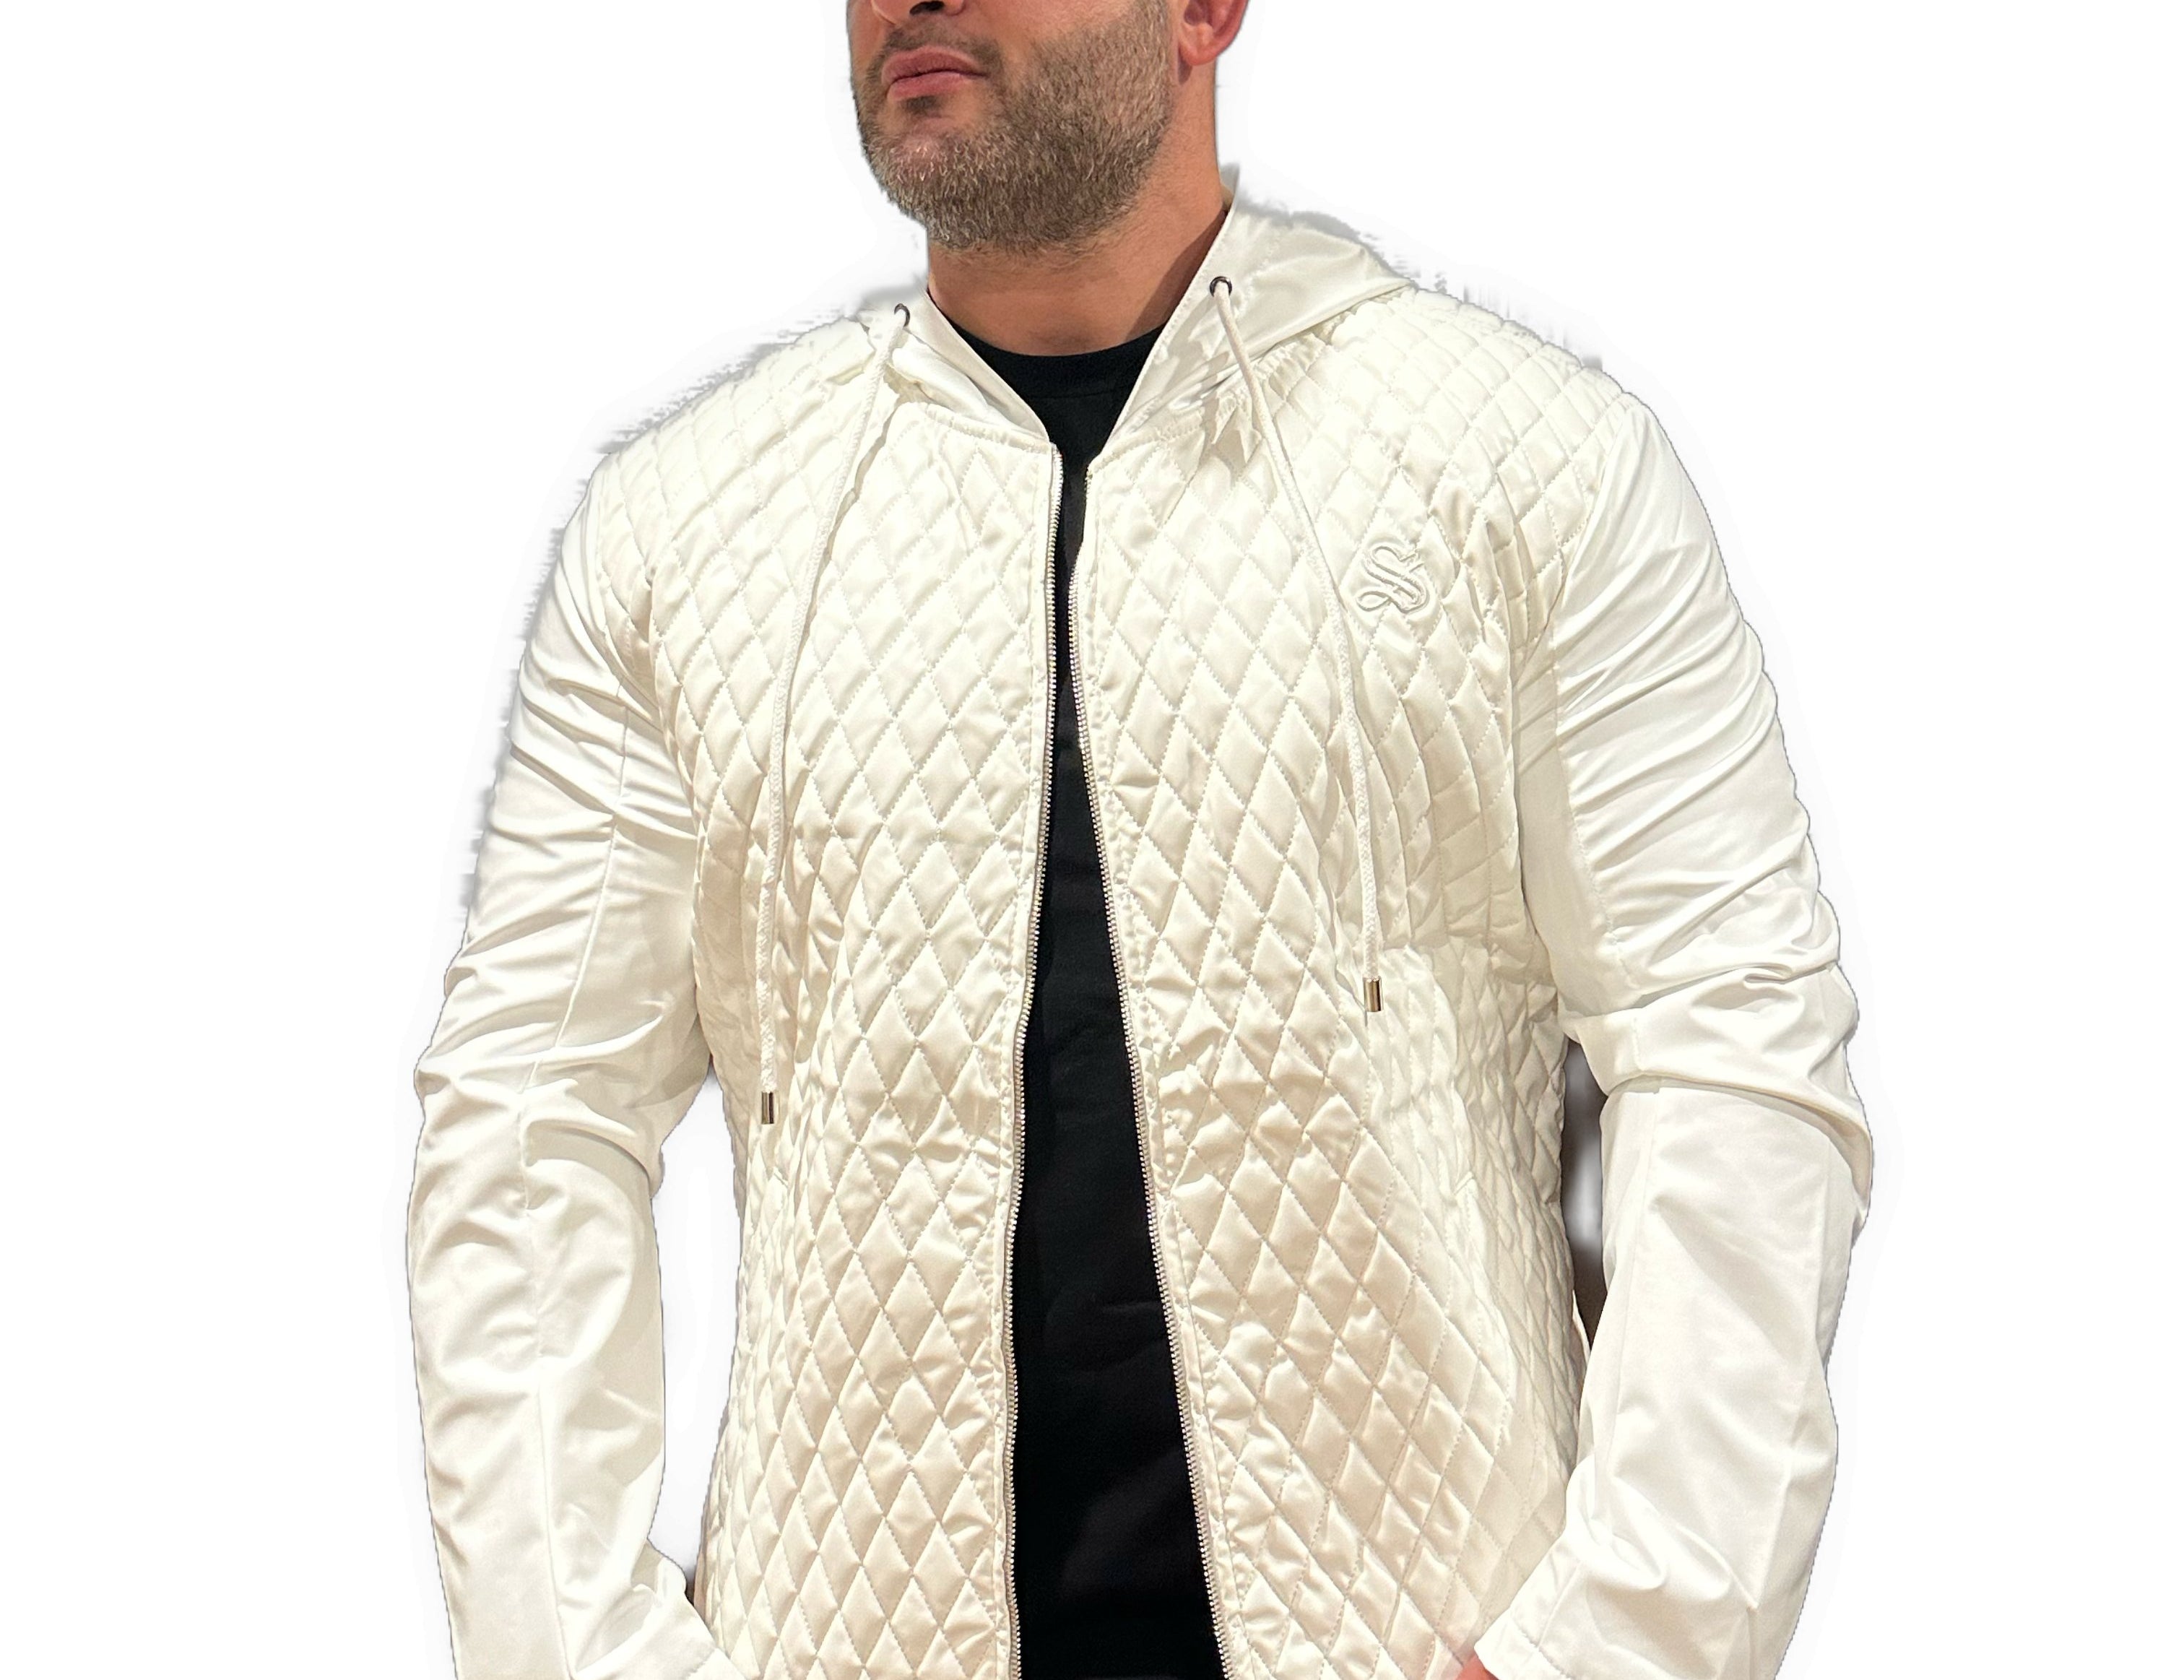 Robin 6 - White Jacket for Men - Sarman Fashion - Wholesale Clothing Fashion Brand for Men from Canada